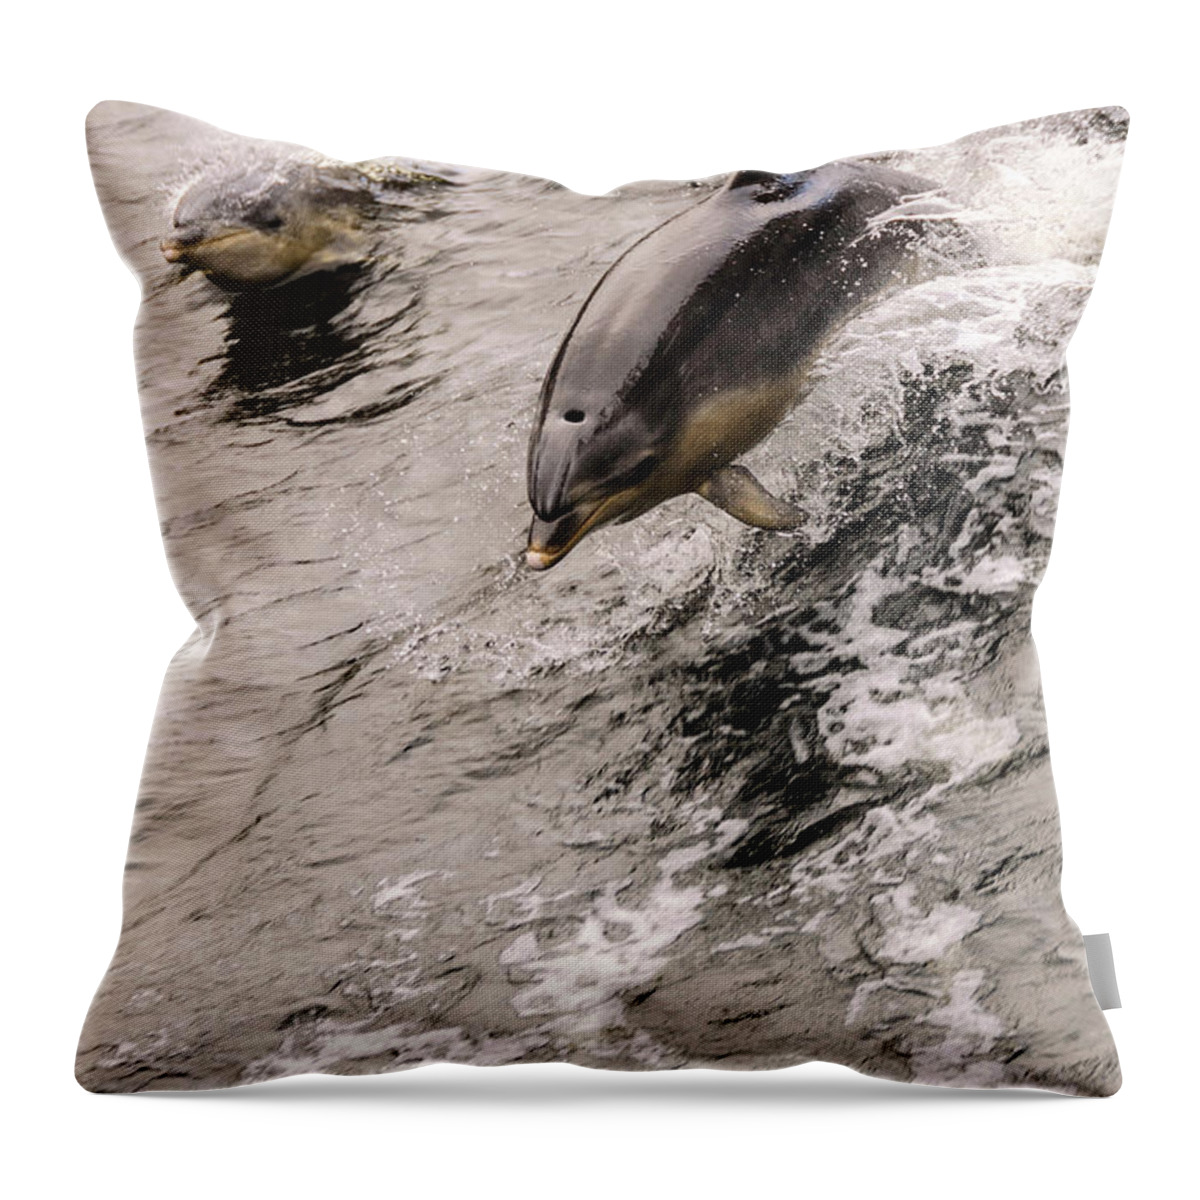 Dolphin Throw Pillow featuring the photograph Dolphins by Werner Padarin